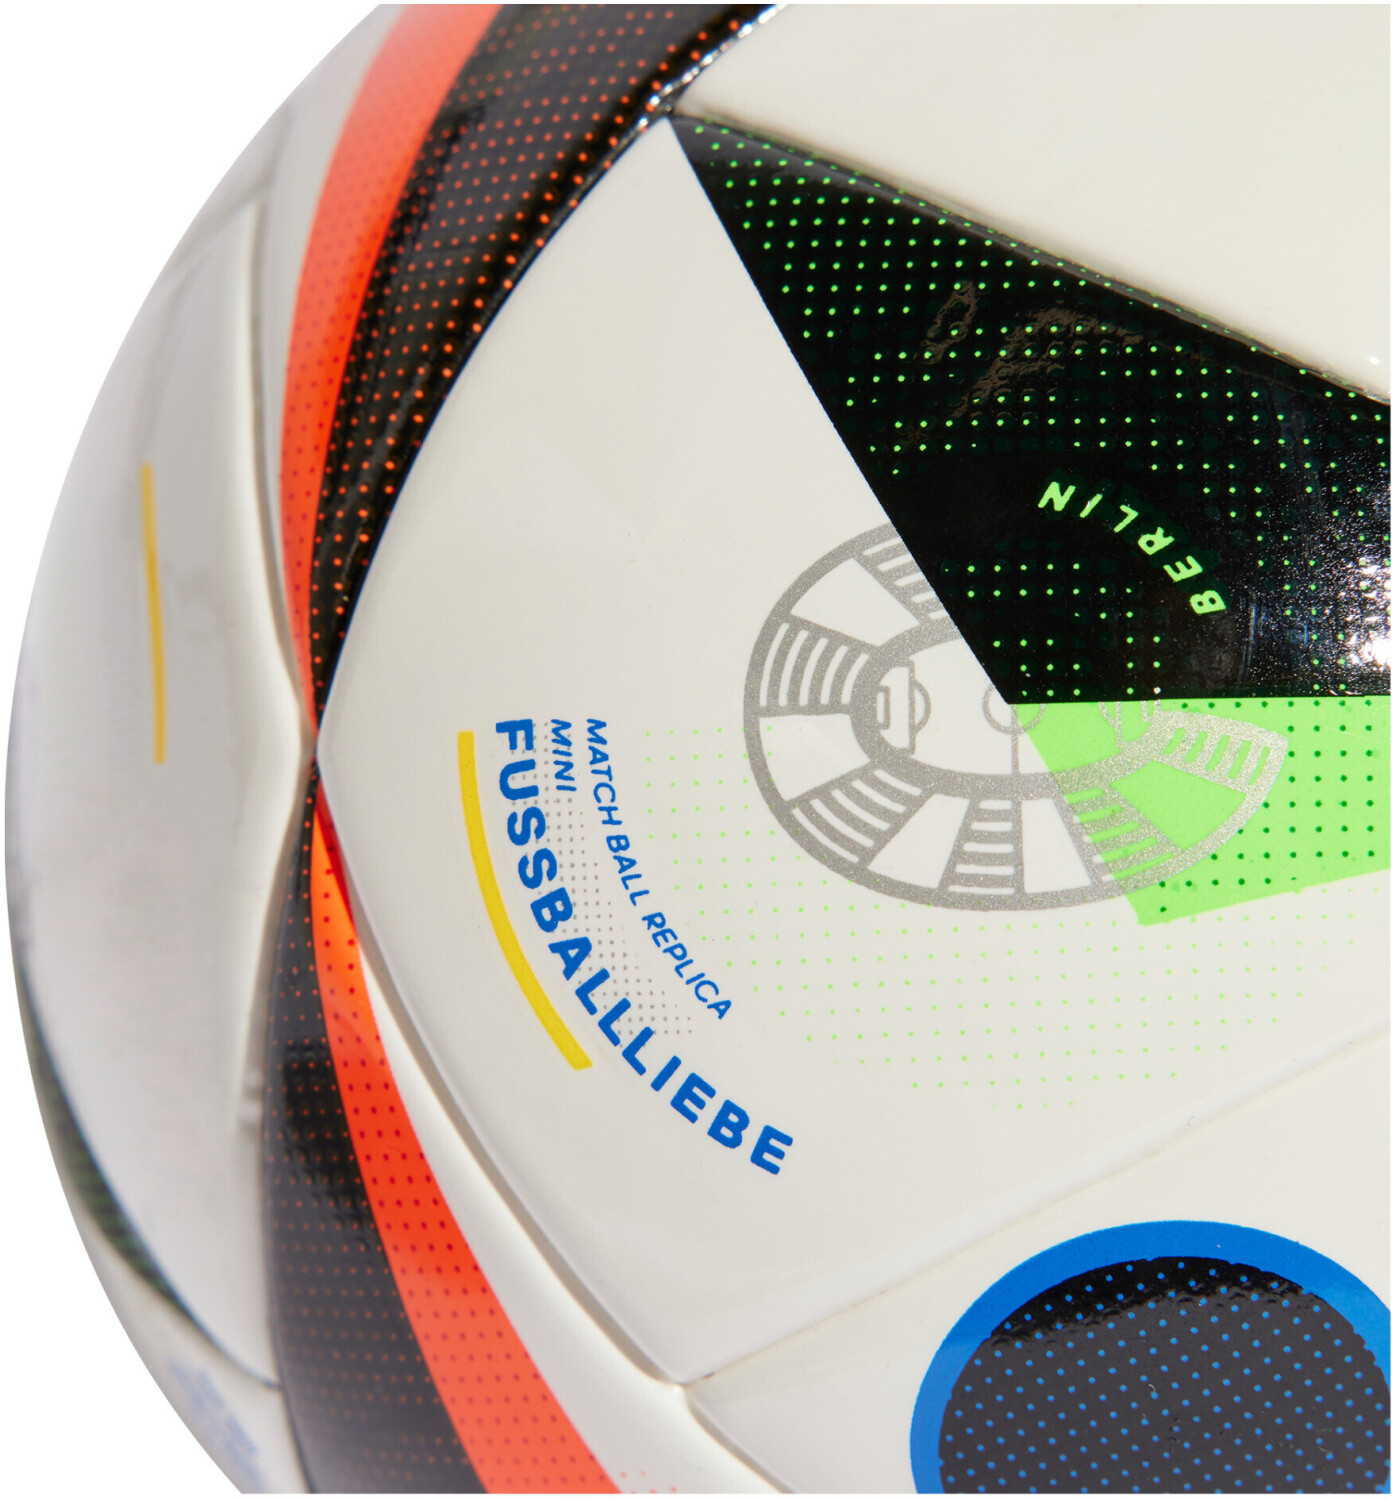 Mini (EURO24) from Best – on Fußballliebe Buy Deals £10.99 (Today) Adidas